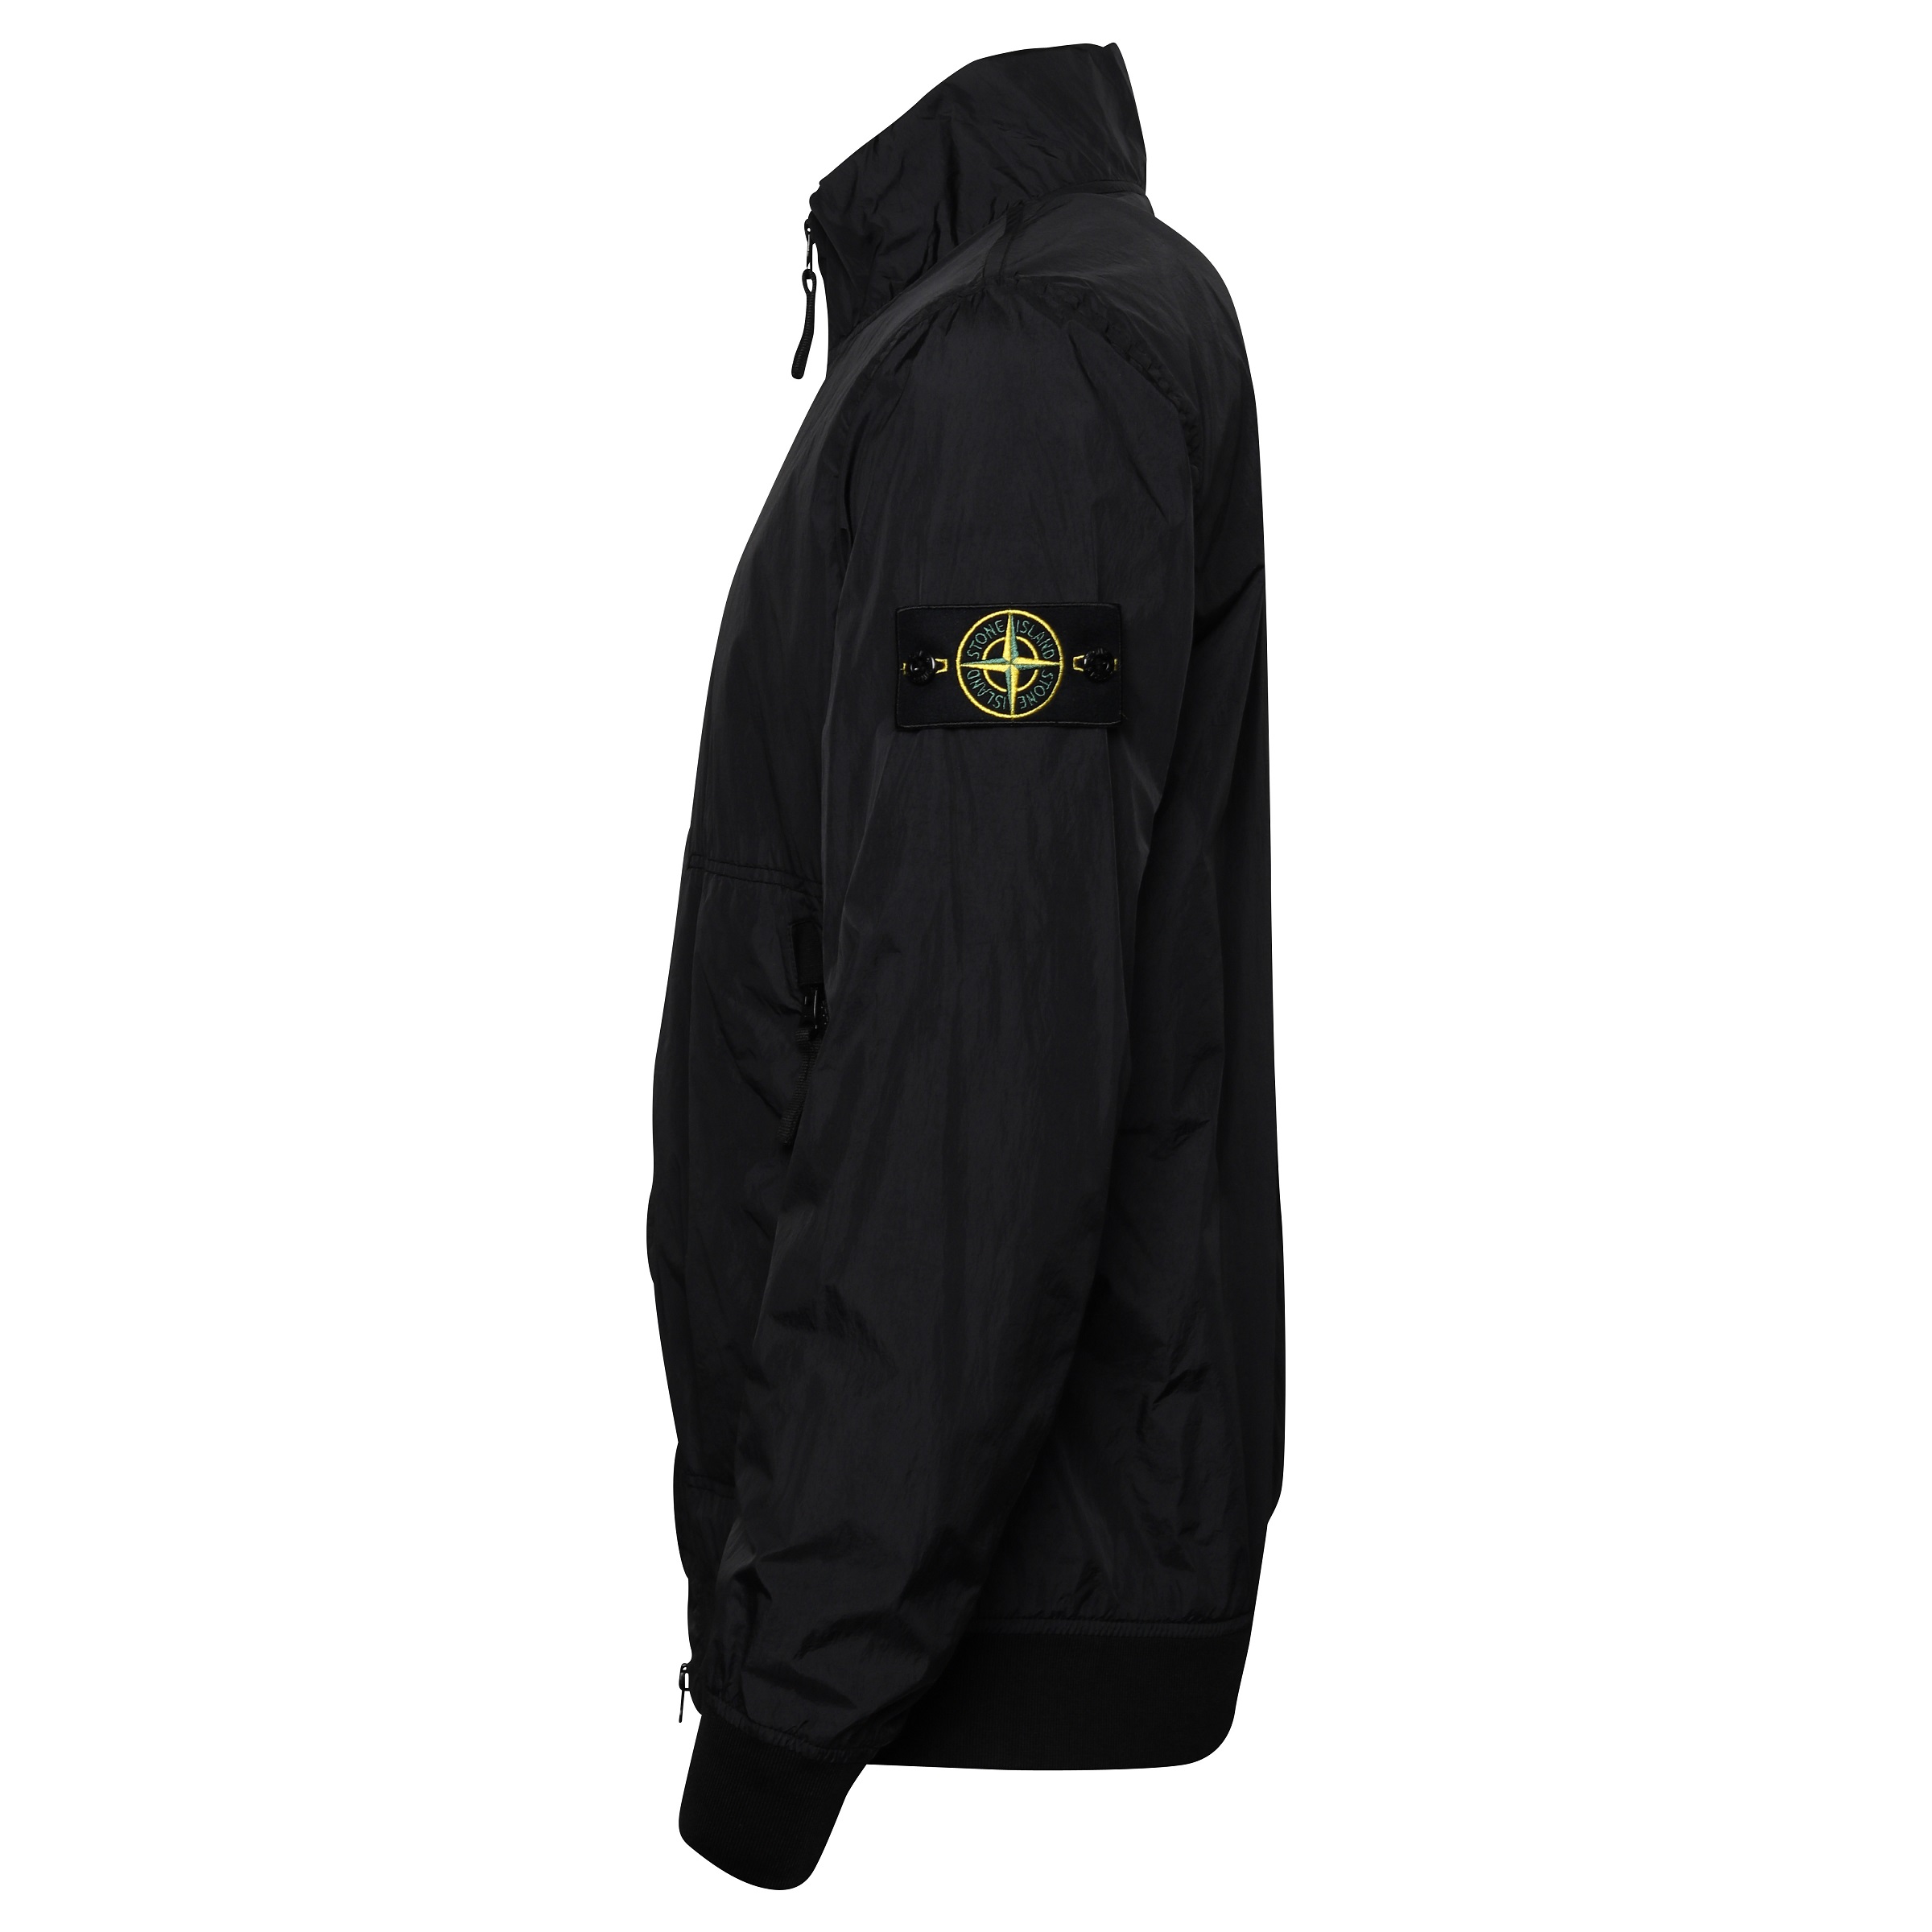 Stone Island Garment Dyed Crinkle Reps Light Jacket in Black M